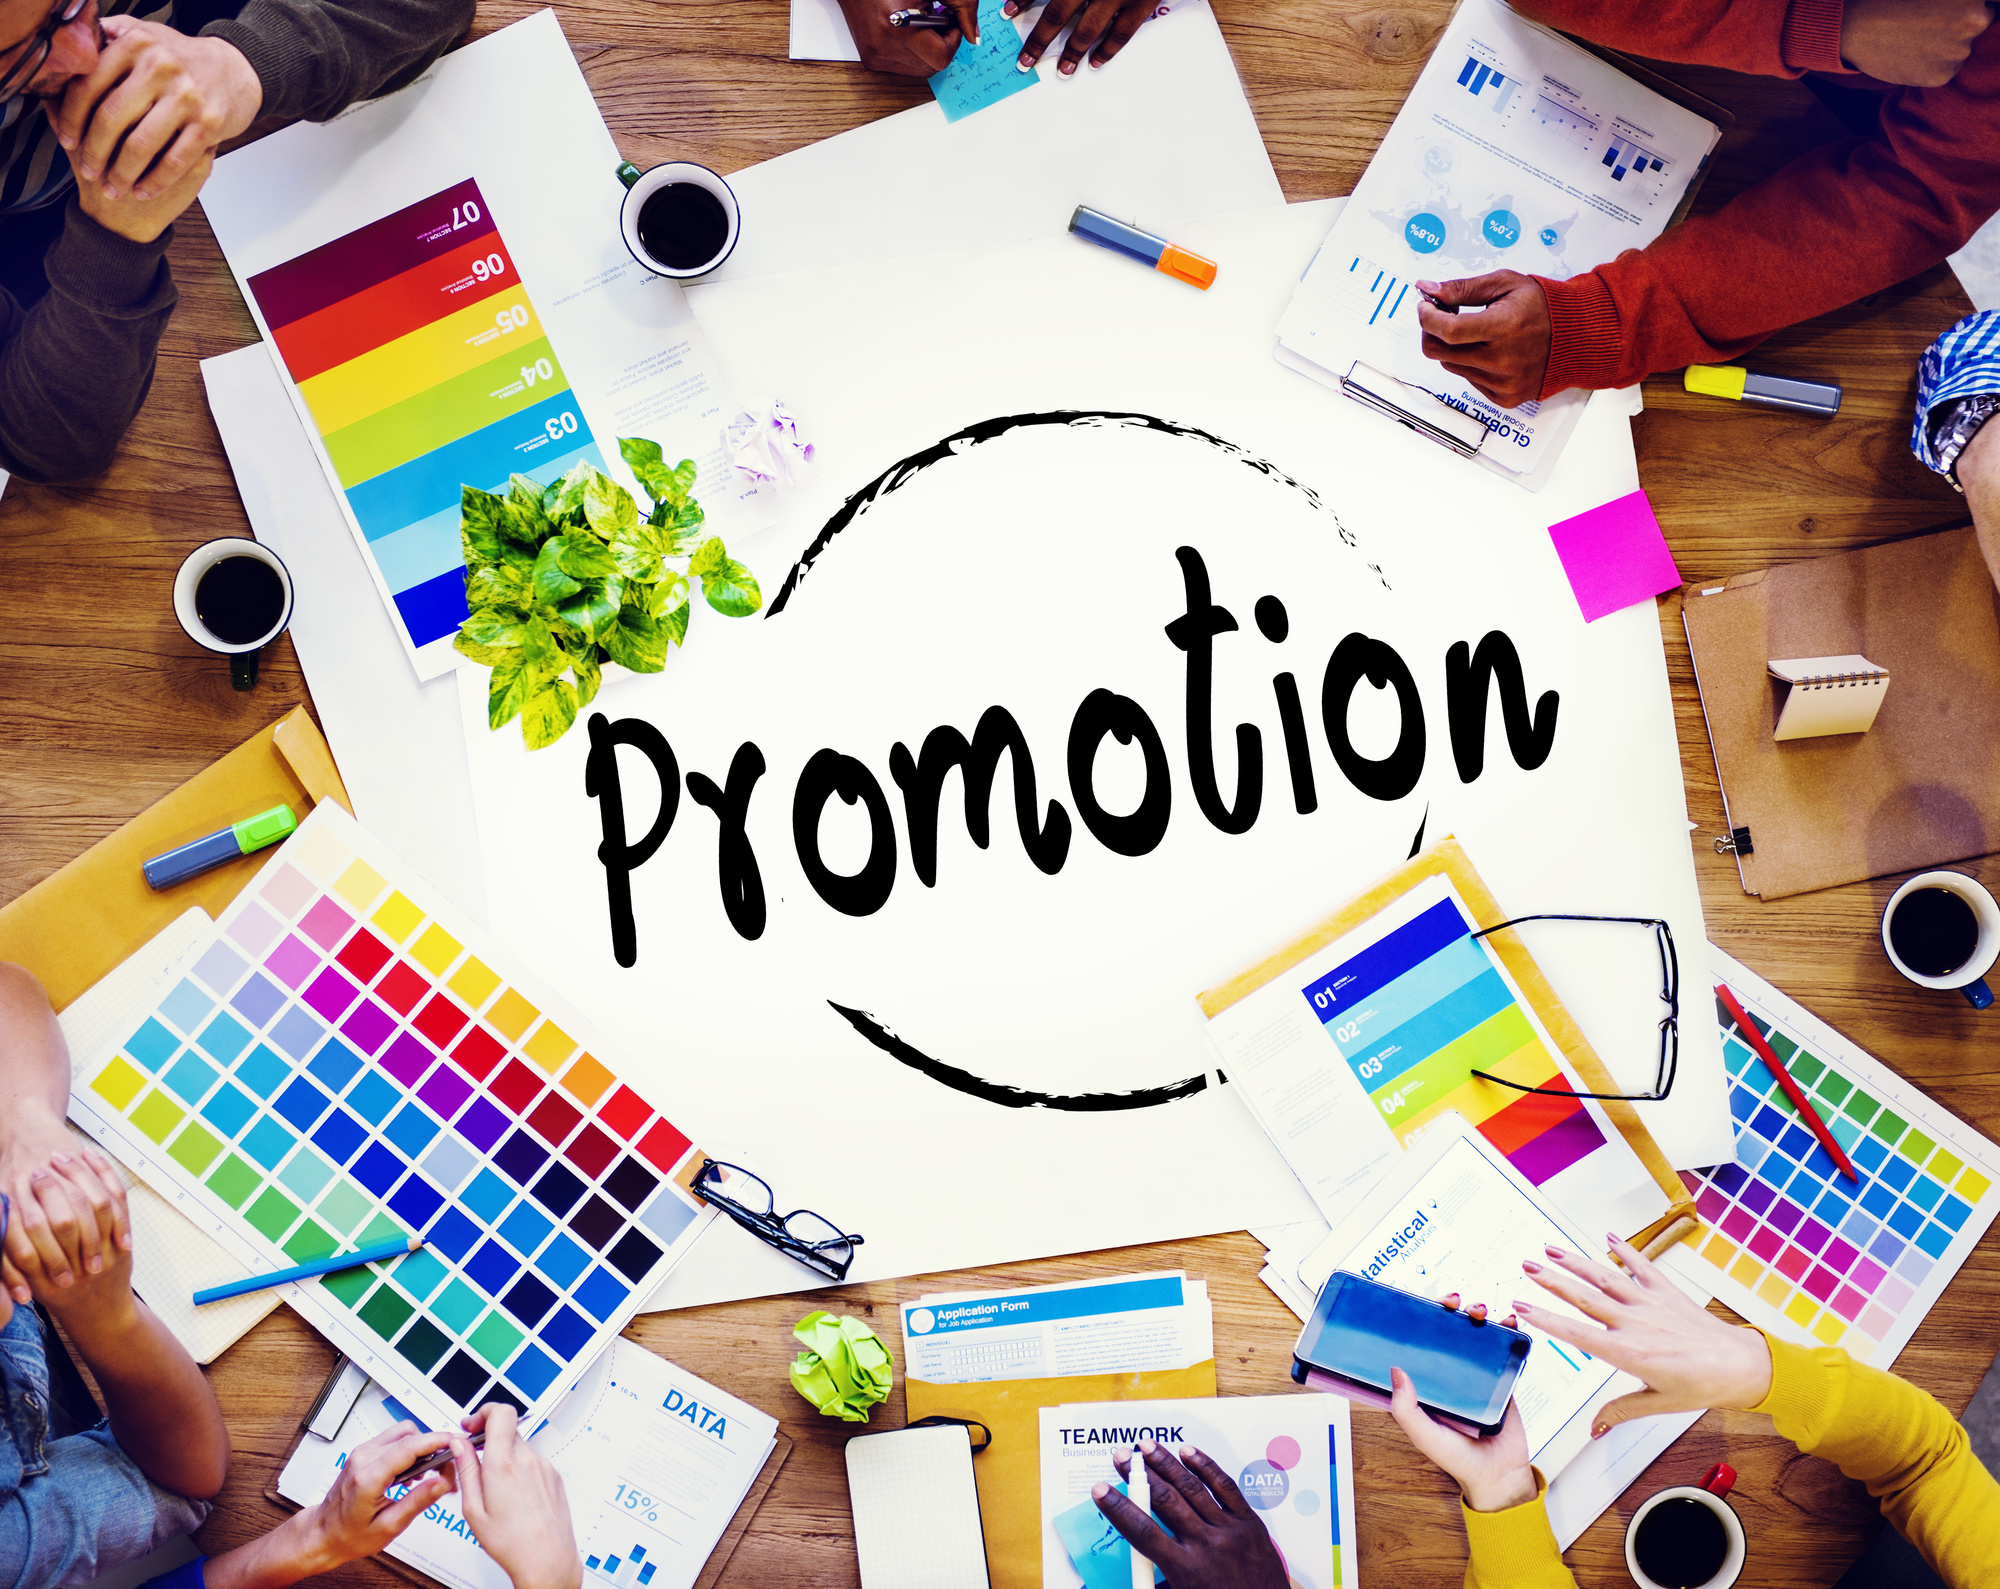 How to Use Print Marketing to Promote a Moving Business